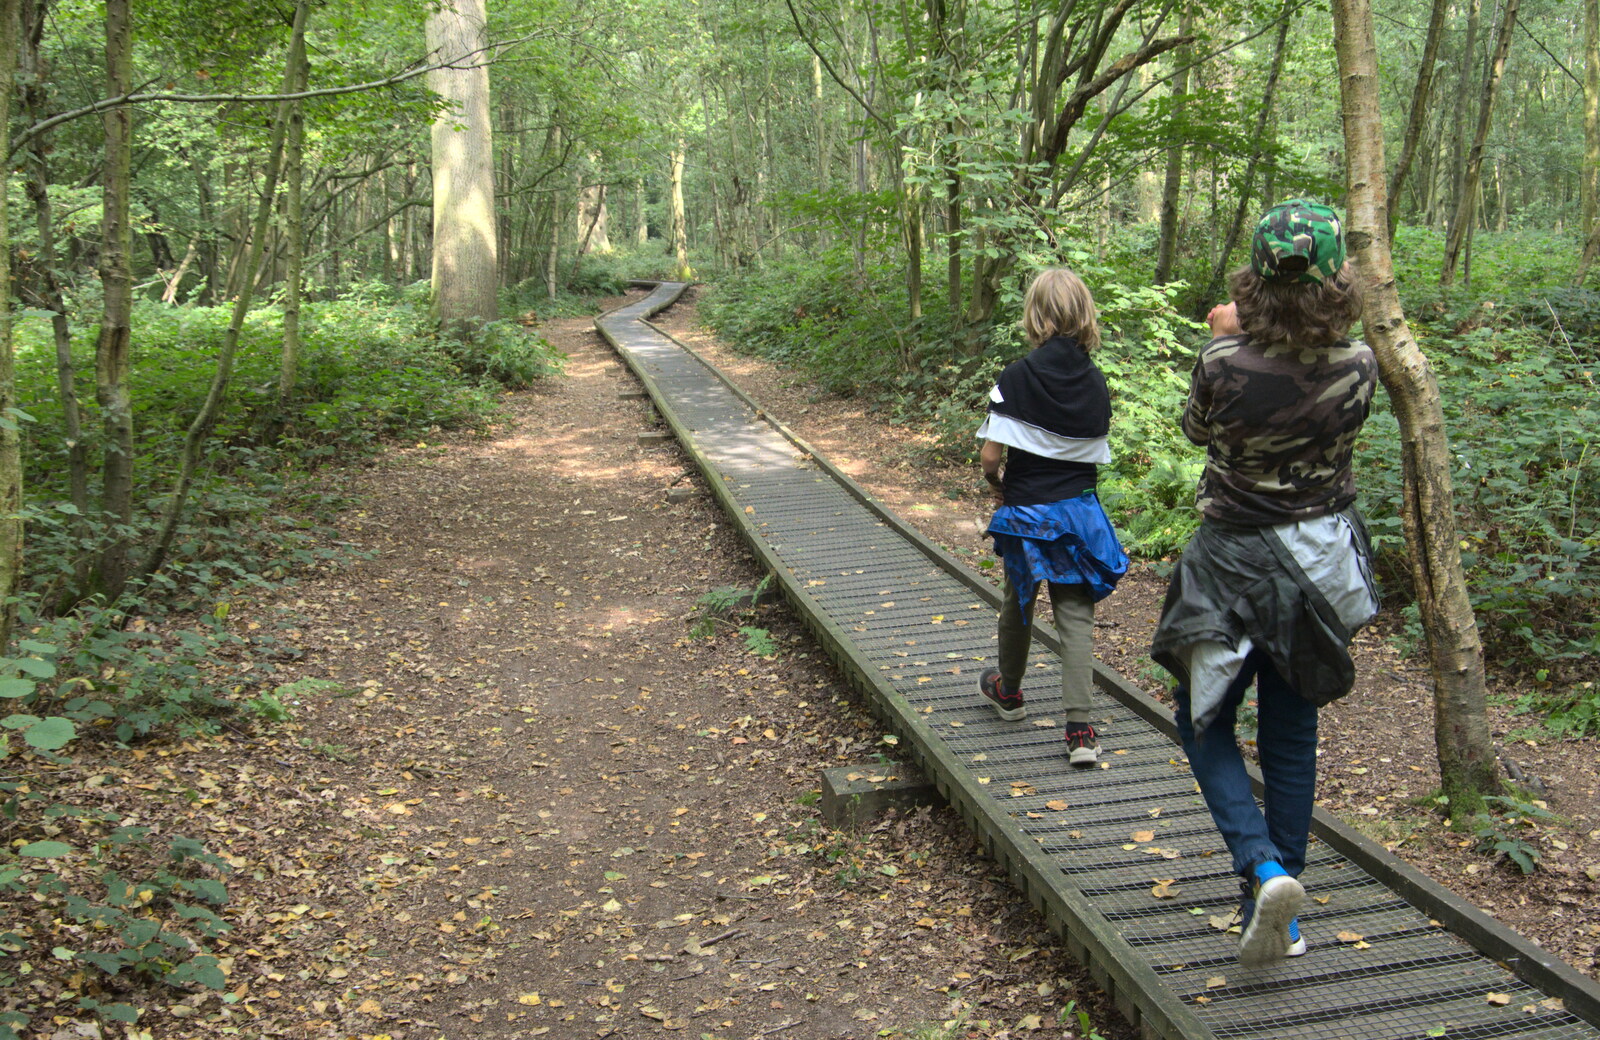 The boys on the boardwalk from Jules Visits, and a Trip to Tyrrel's Wood, Pulham Market, Norfolk - 16th August 2020